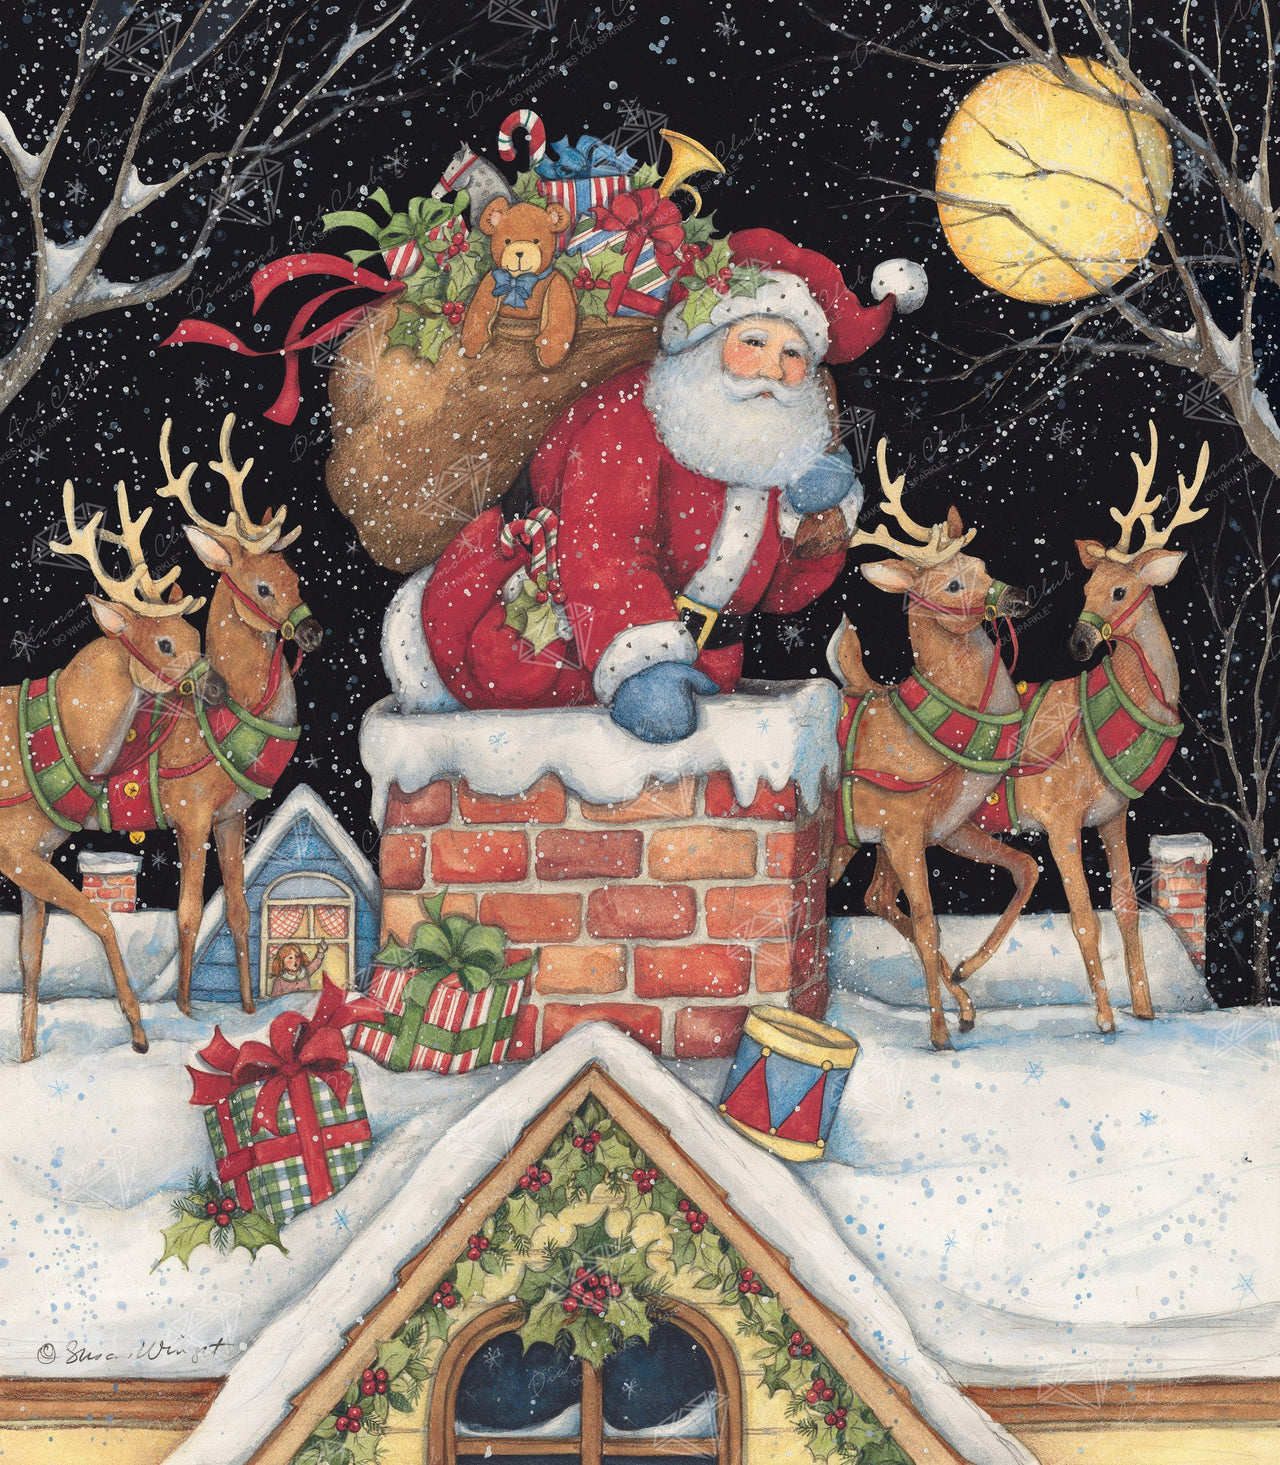 Diamond Painting Santa In Chimney 22" x 25″ (58cm x 64cm) / Square with 49 Colors including 4 ABs